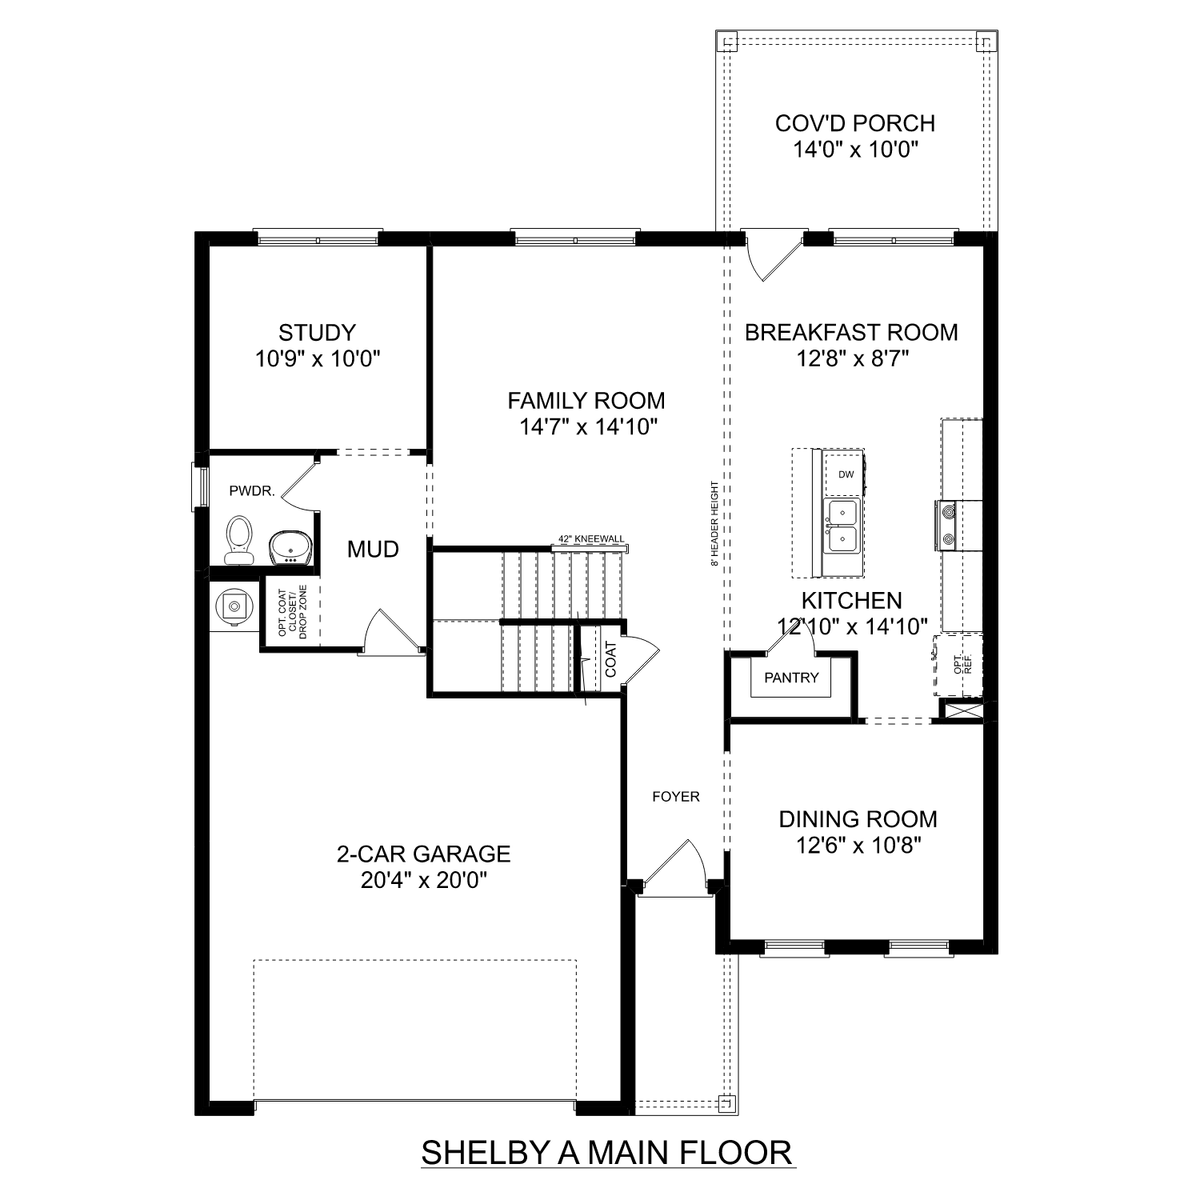 1 - The Shelby A floor plan layout for 29446 Canoe Circle in Davidson Homes' Creekside community.